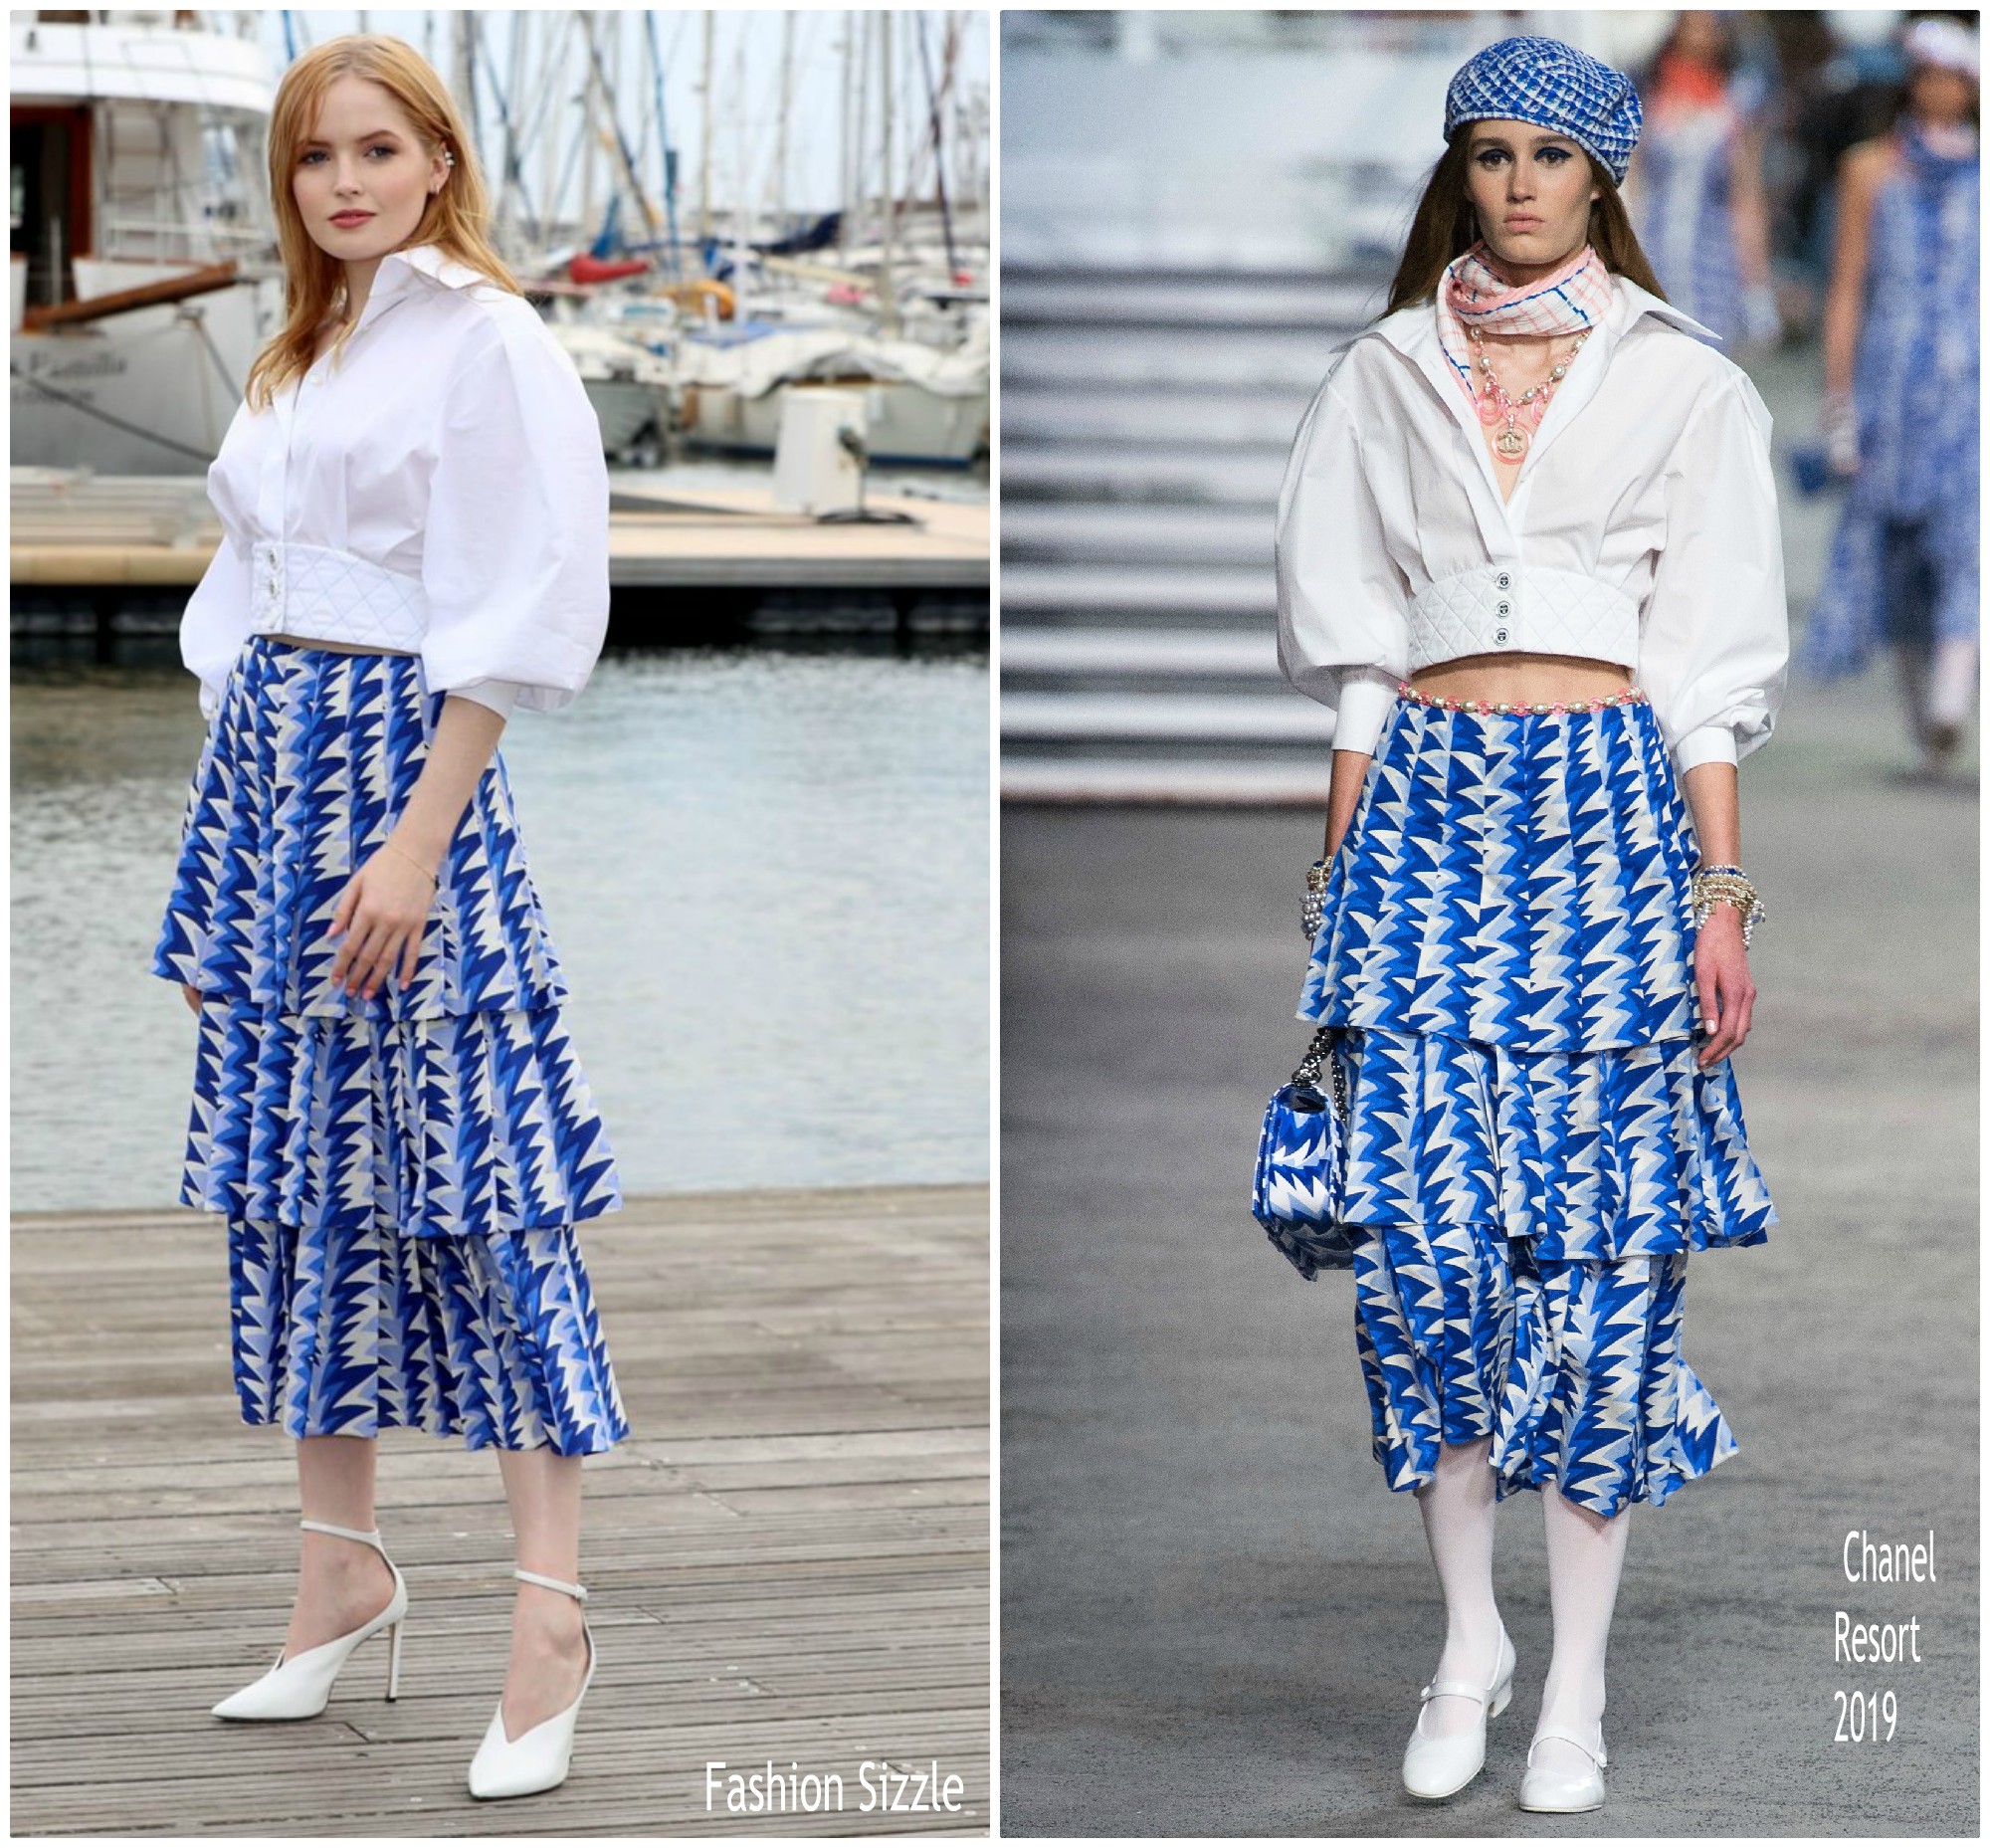 ellie-bamber-in-chanel-les-miserables-MIPCOM-2018-photocall